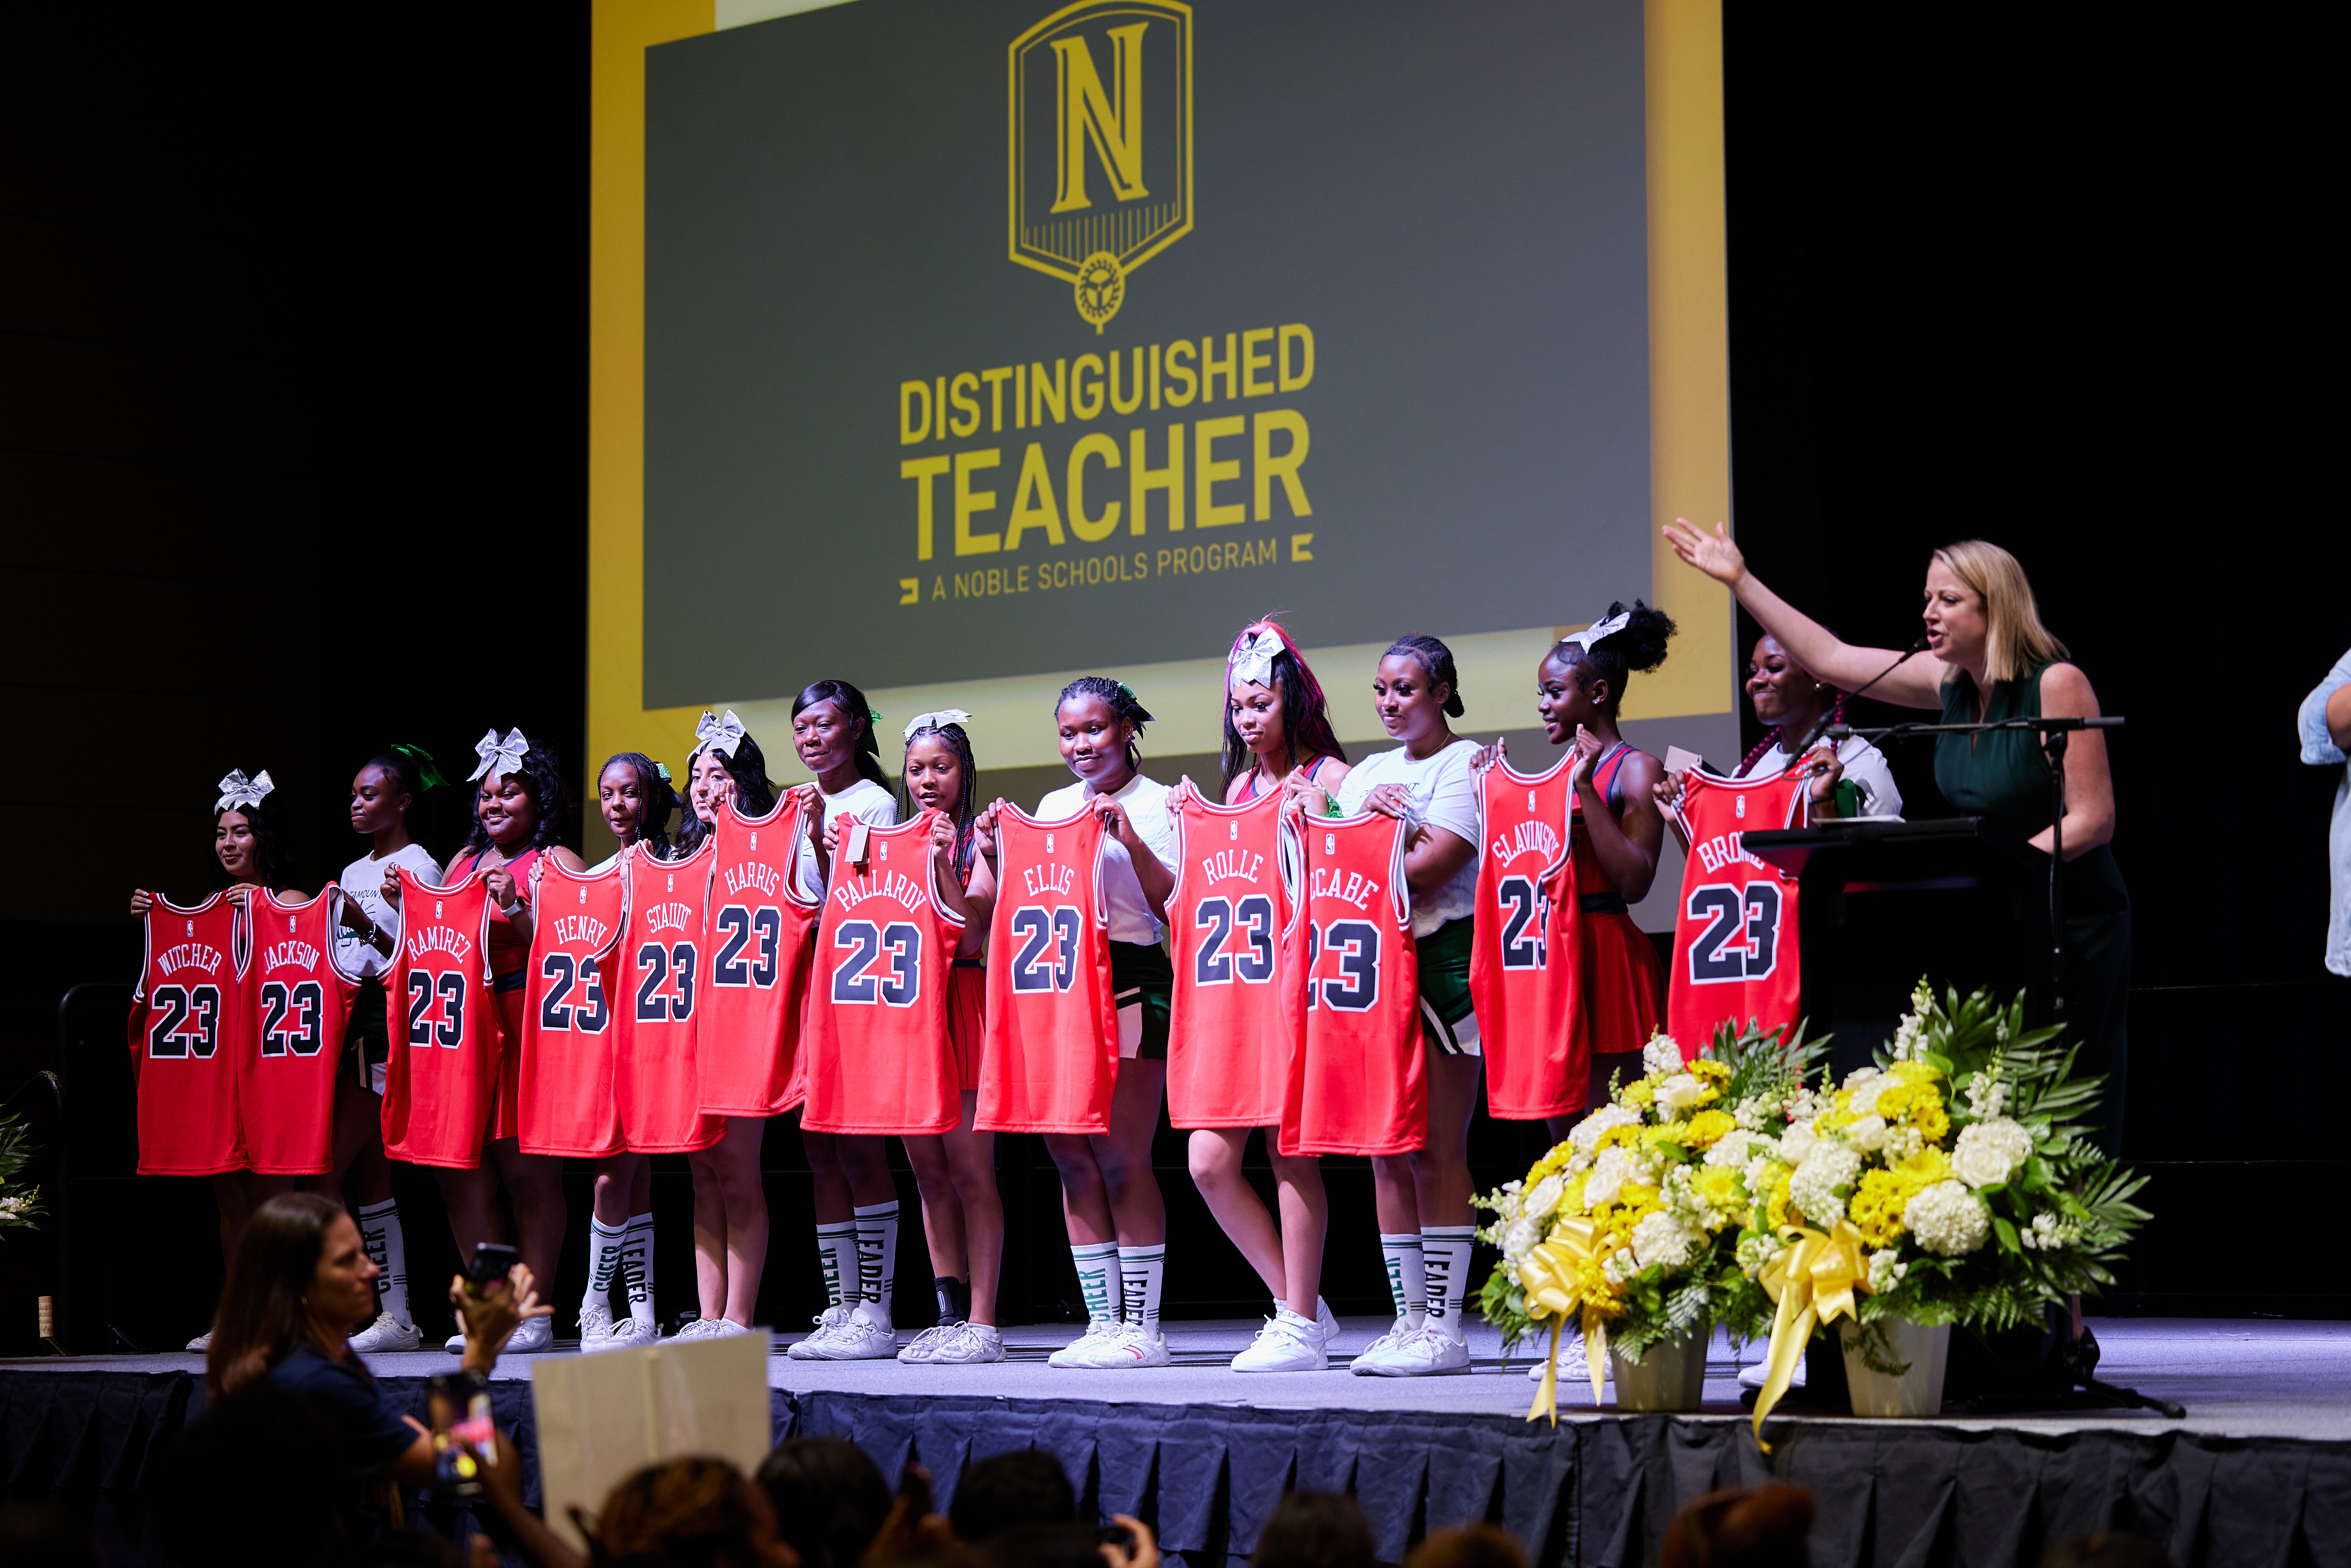 Photo shows the Chicago Bulls College Prep cheer team on the stage presenting personalized jerseys for the Noble Schools' Distinguished Teacher 2023 cohort. To their right is Ellen Metz, Head of Schools at Noble Schools, who is at the podium and speaking to the crowd, her hand raised towards the jerseys to present them. Behind them is a projector screen that shows the Noble Distinguished Teacher Program logo.